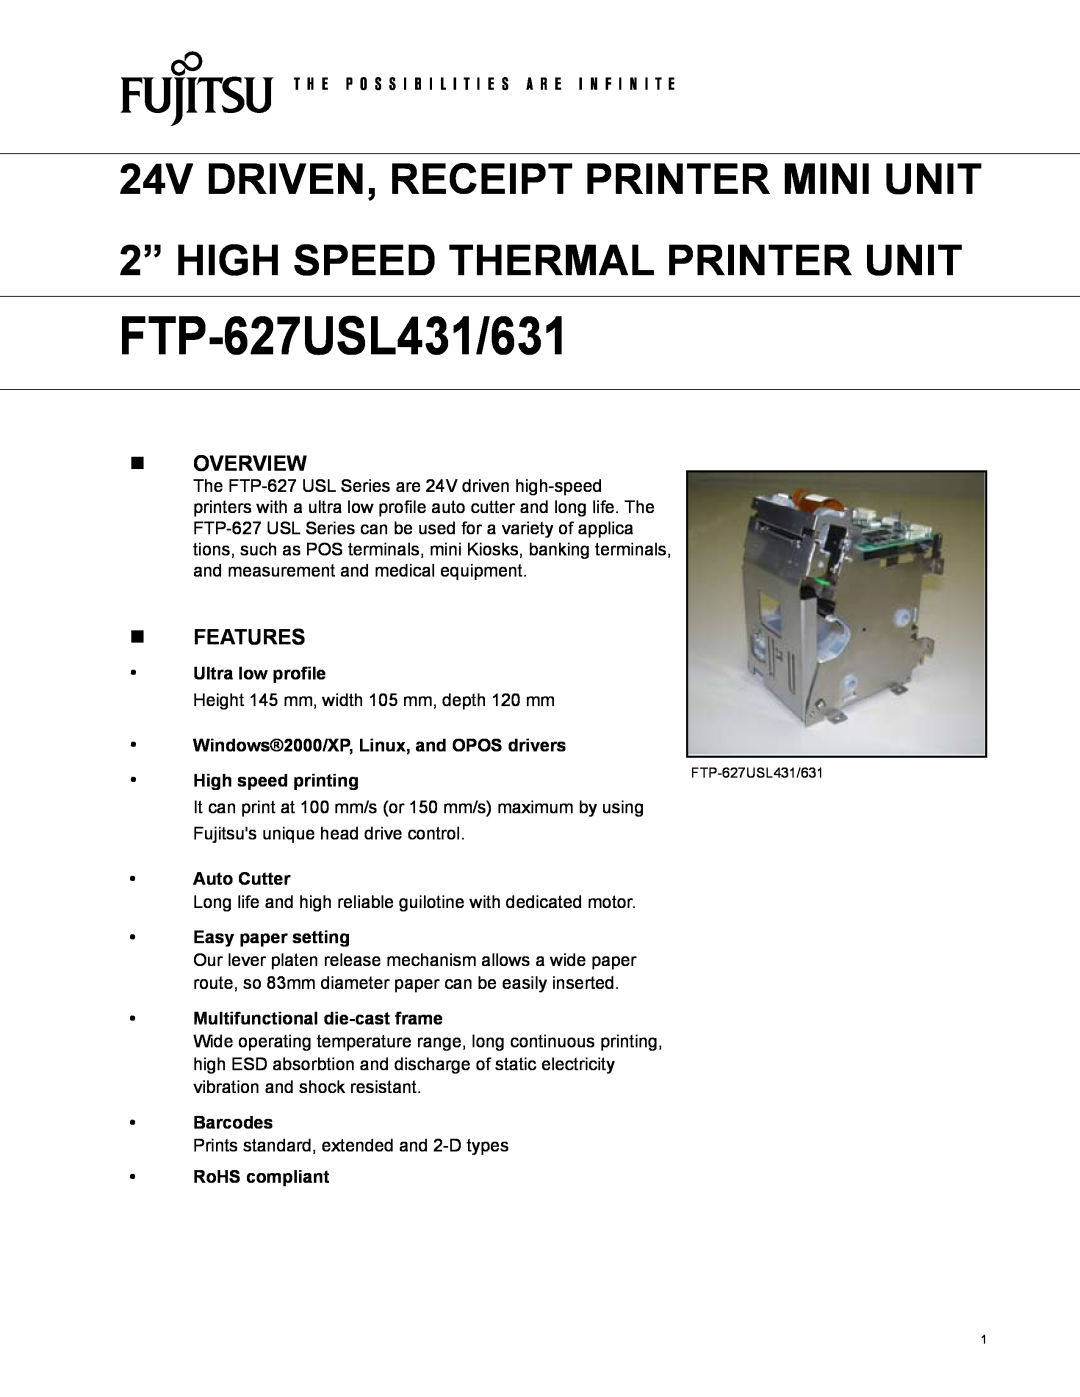 Fujitsu FTP-627USL631 manual  Overview,  Features, Ultra low profile, Auto Cutter, Easy paper setting, Barcodes 